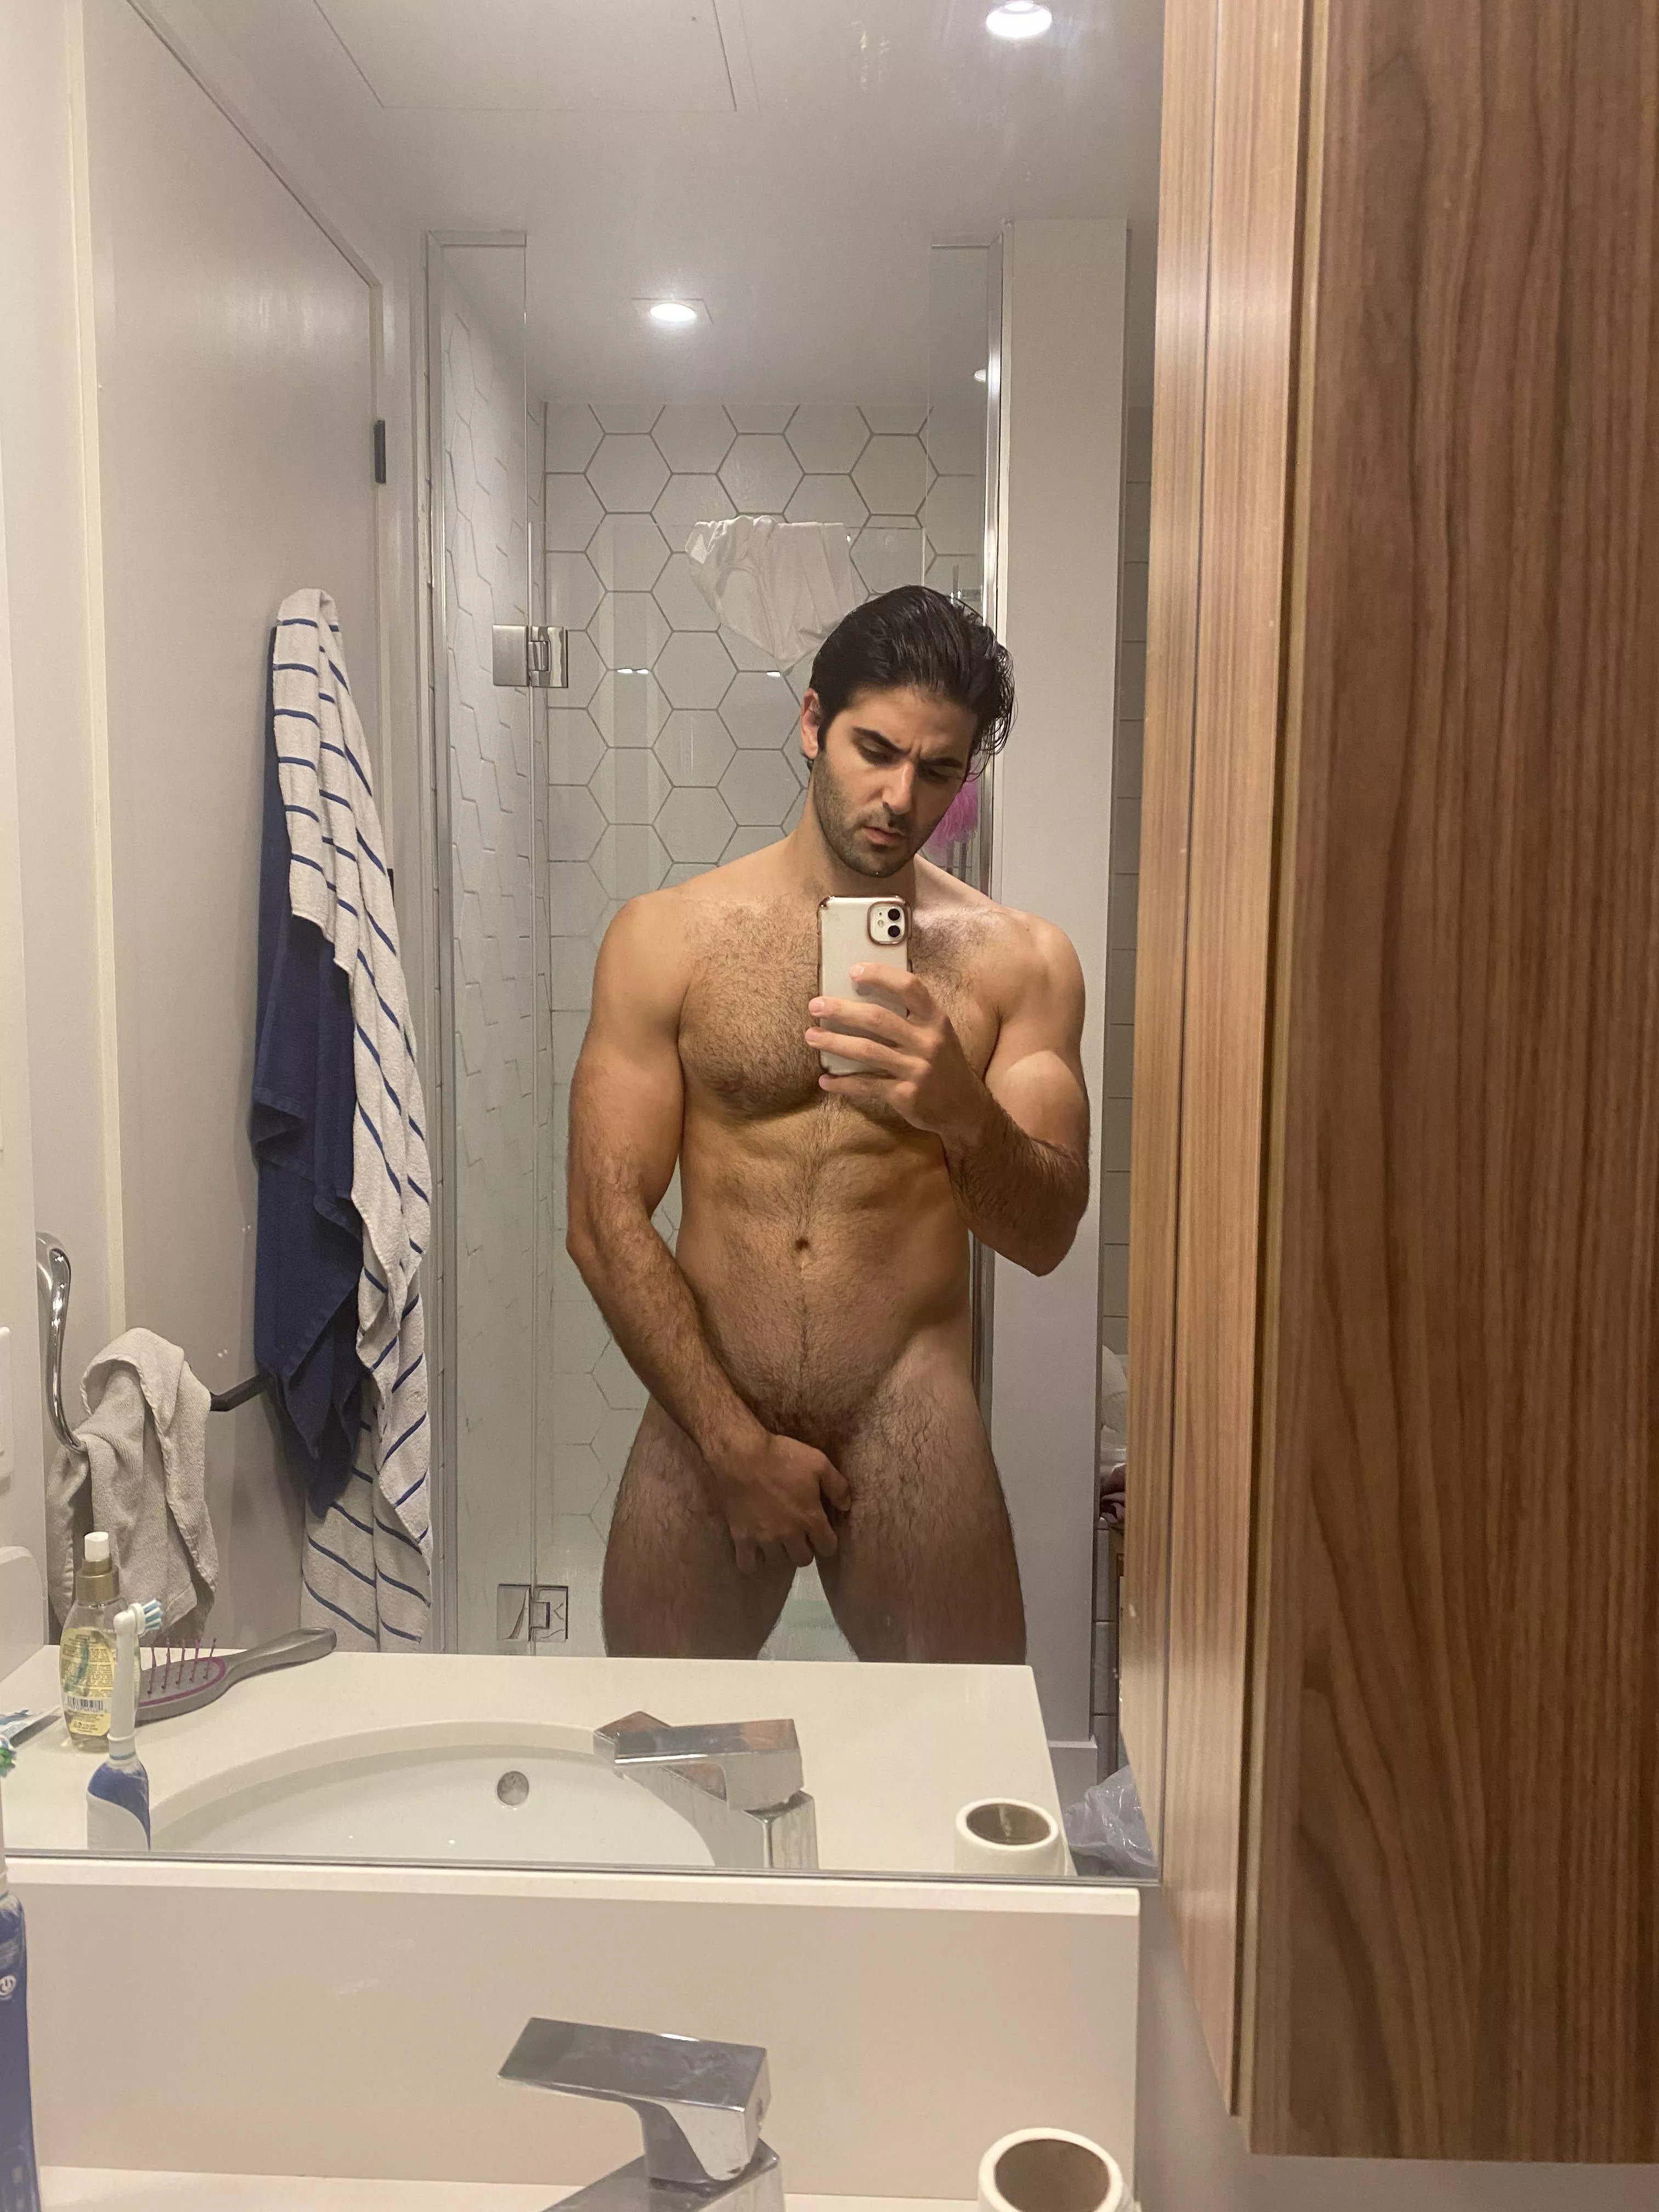 You can call me your Vegan Daddy. nudes : jocks | NUDE-PICS.ORG